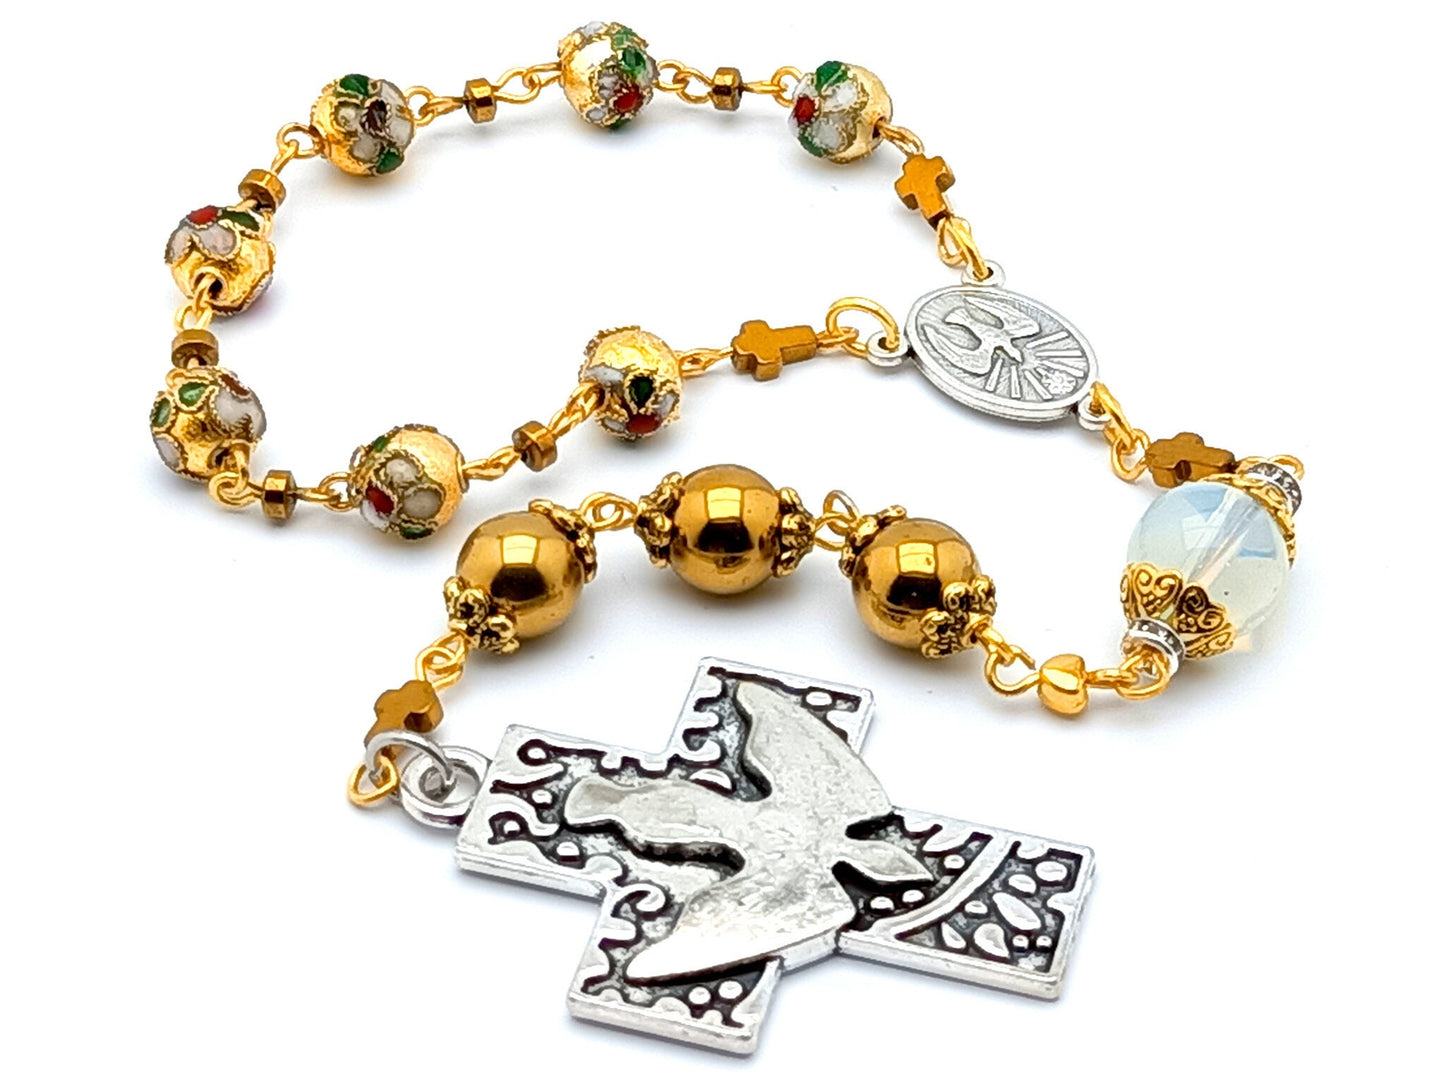 Holy Spirit unique rpsary beads prayer chaplet with cloisonne and hematite gemstone beads and Holy Spirit centre and cross.